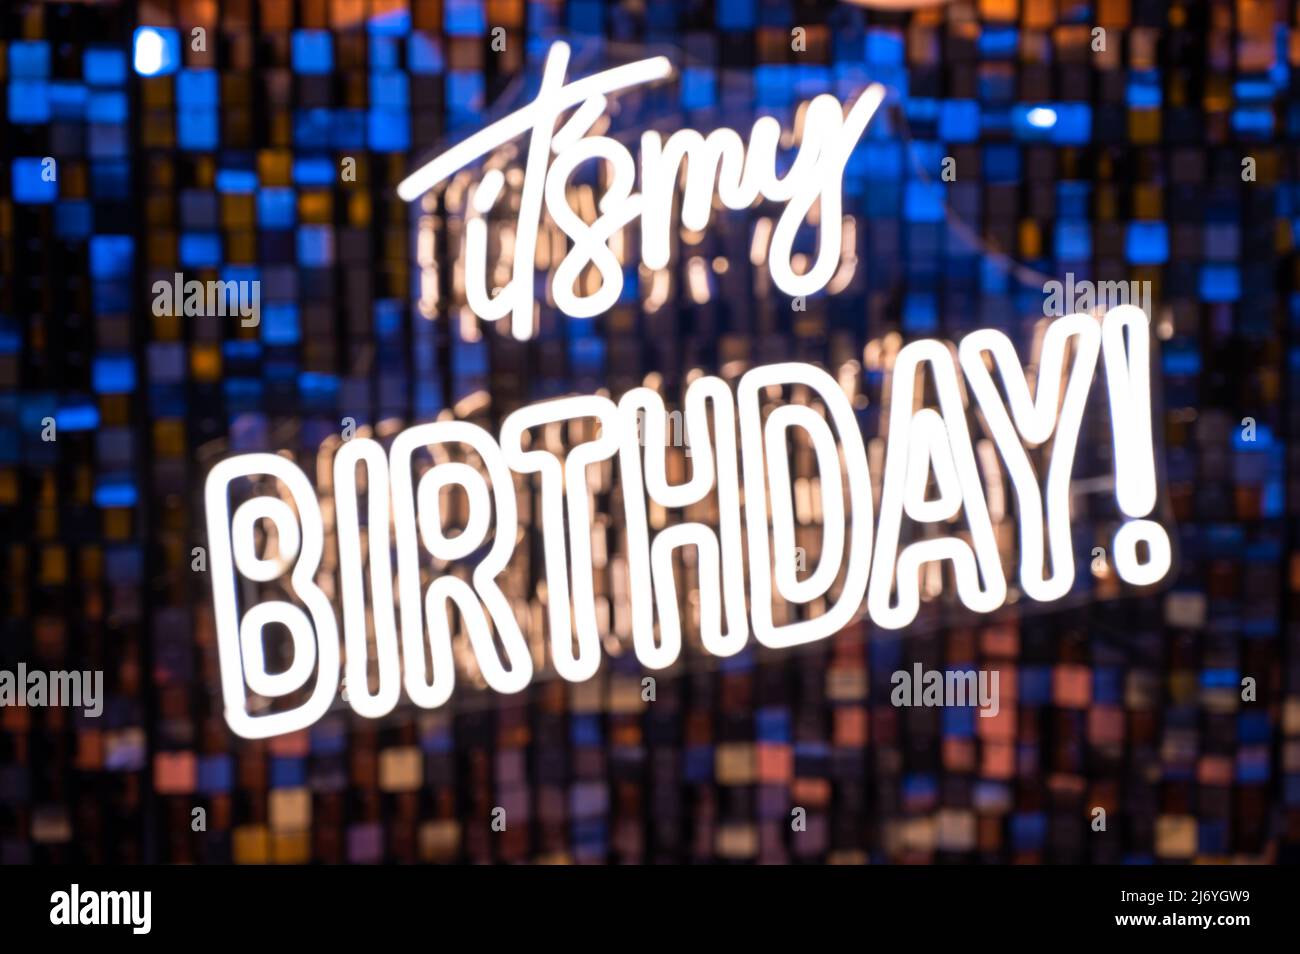 It's my birthday party background with text and colorful tools, top view Stock Photo